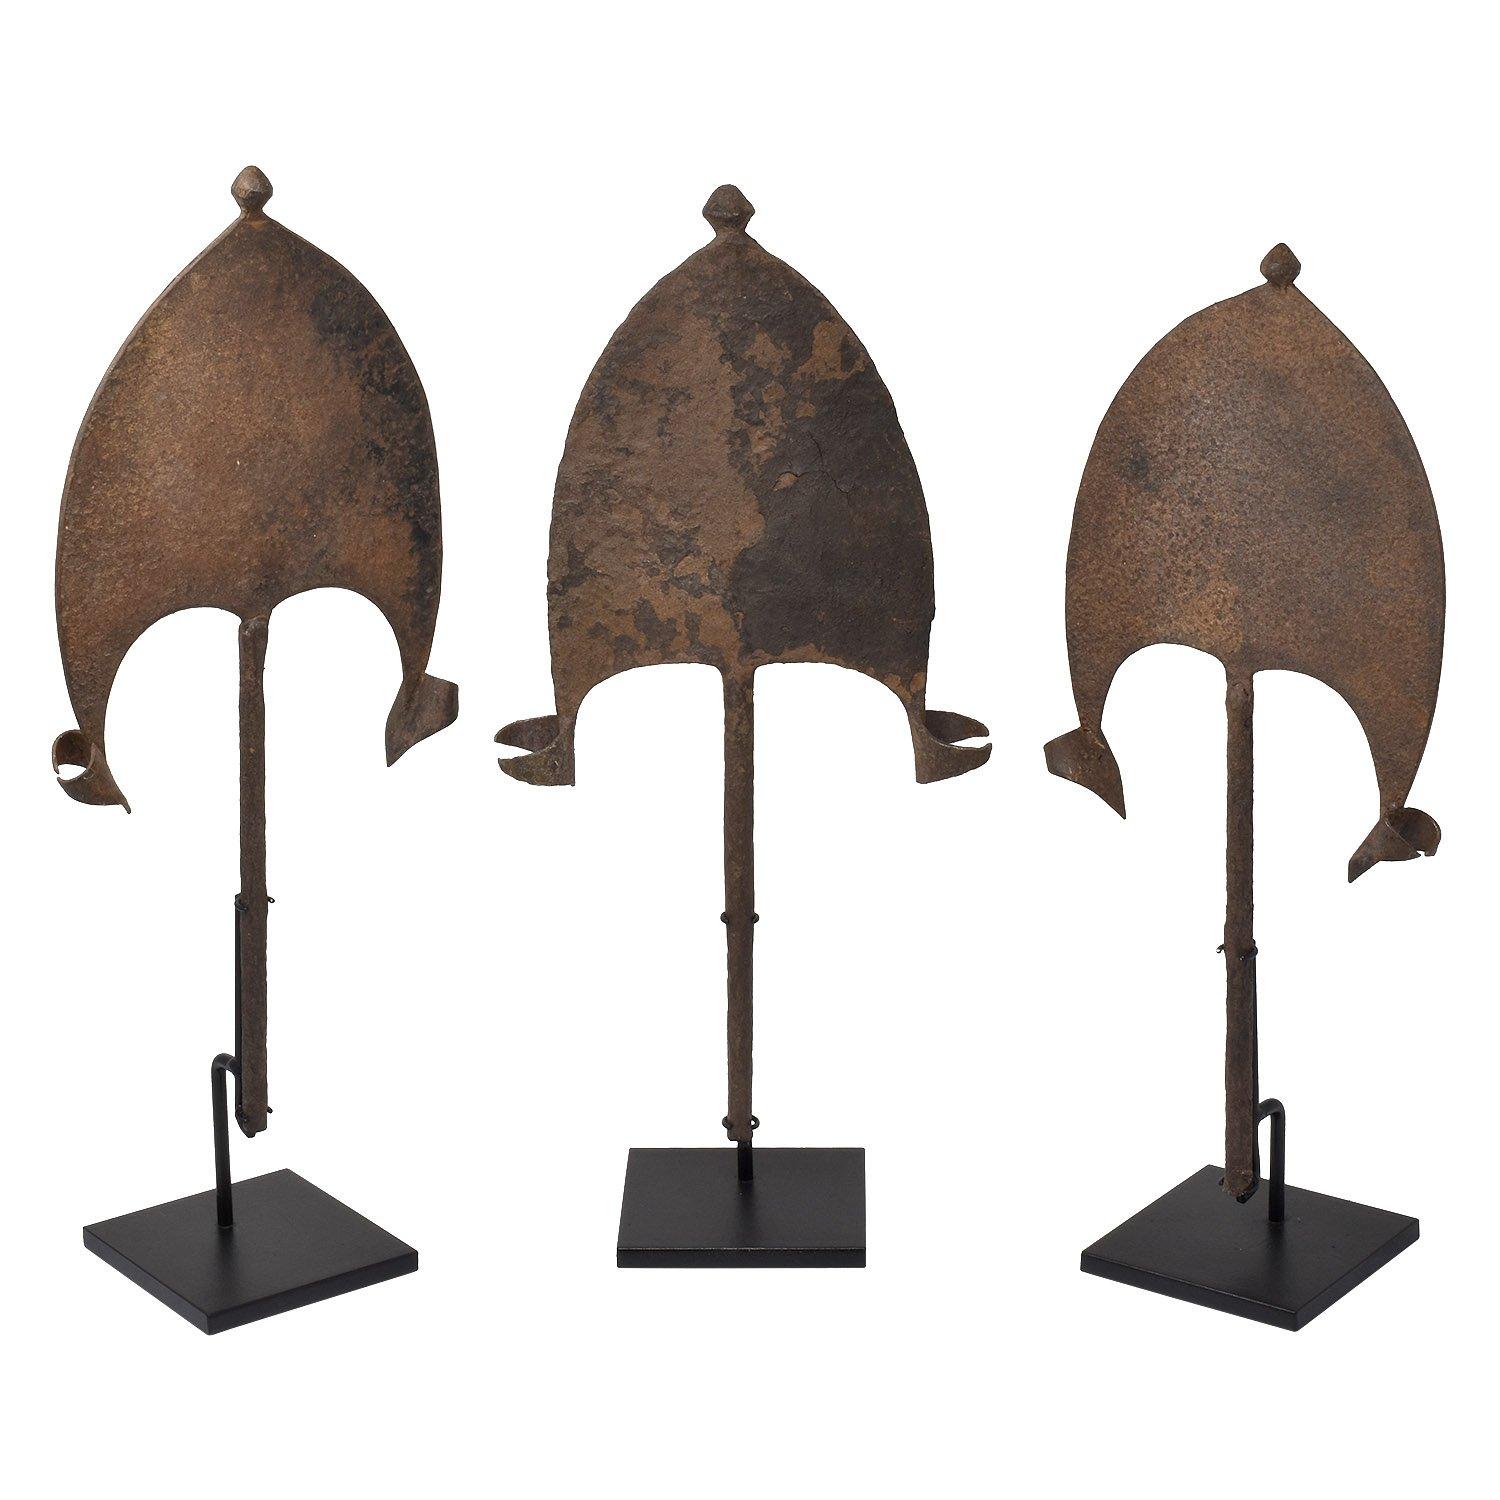 20th Century Hoe-Shaped Iron Currency 